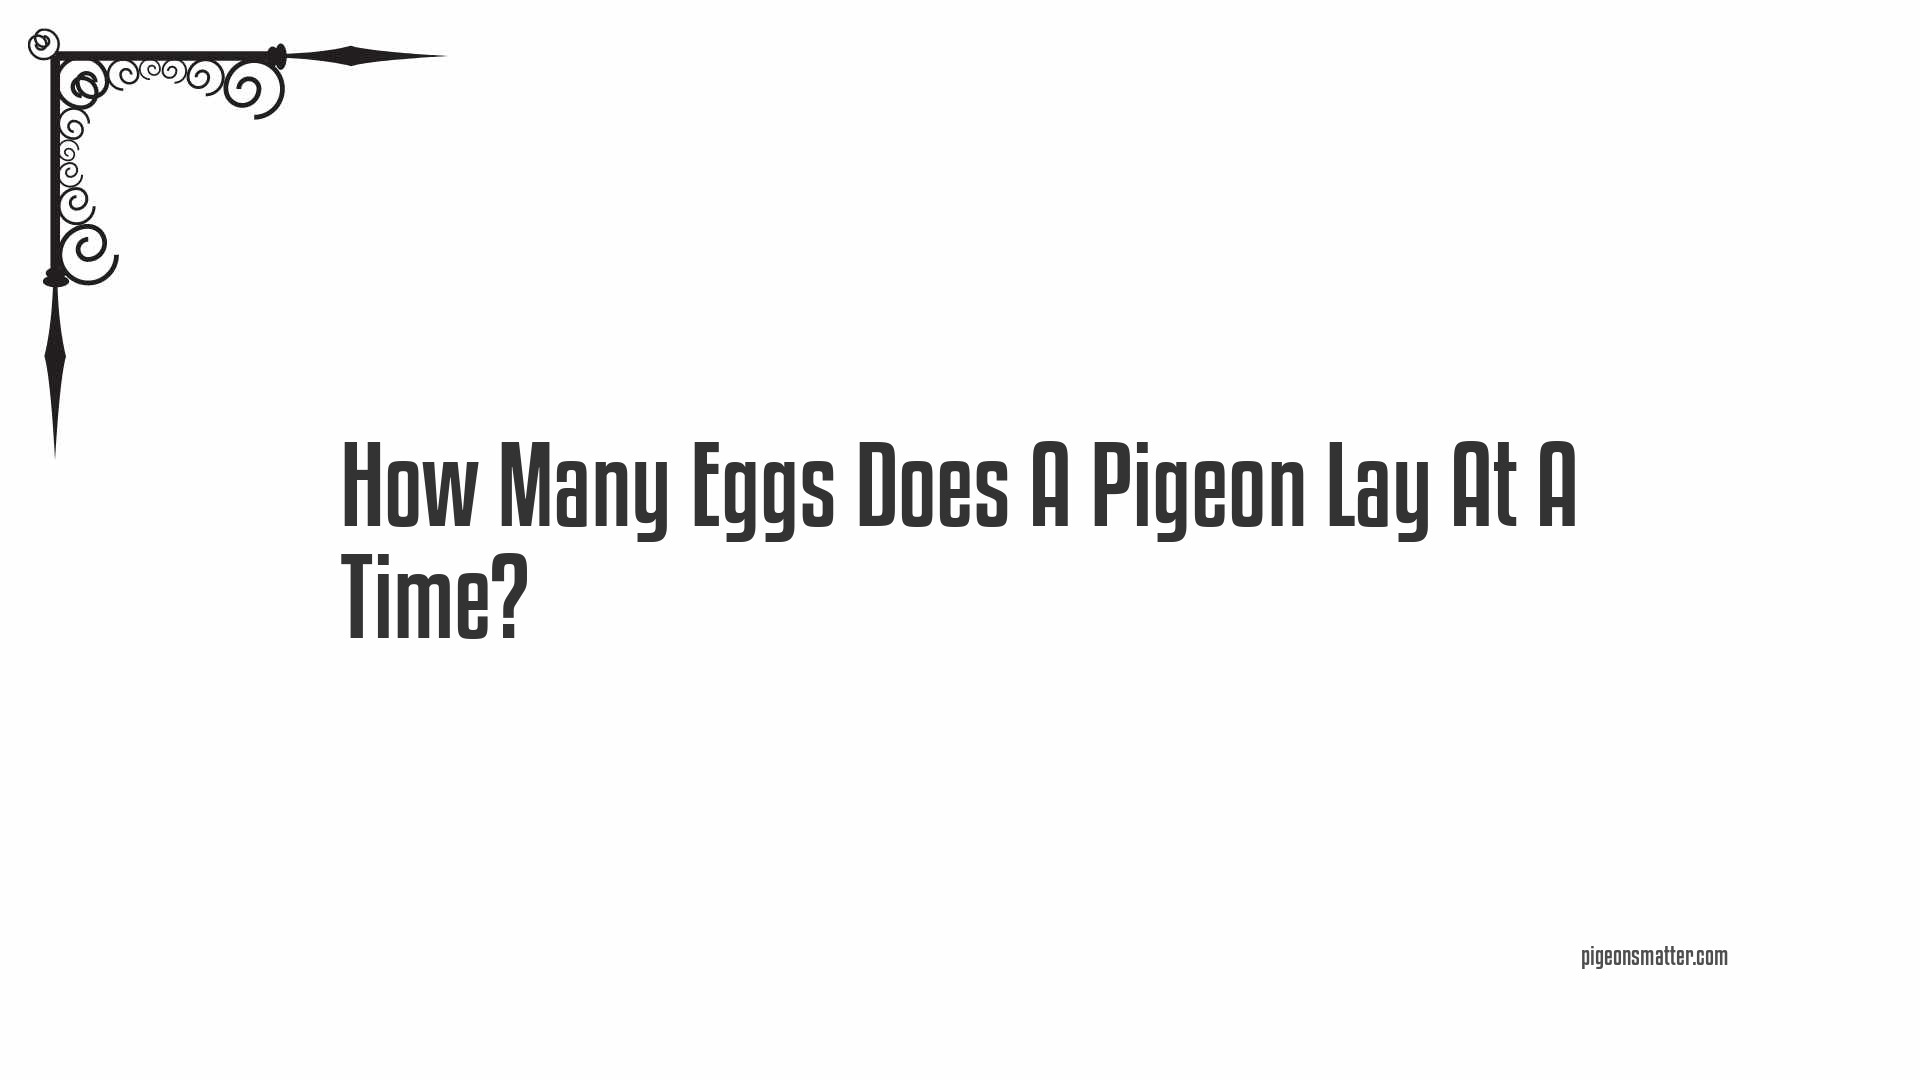 How Many Eggs Does A Pigeon Lay At A Time?